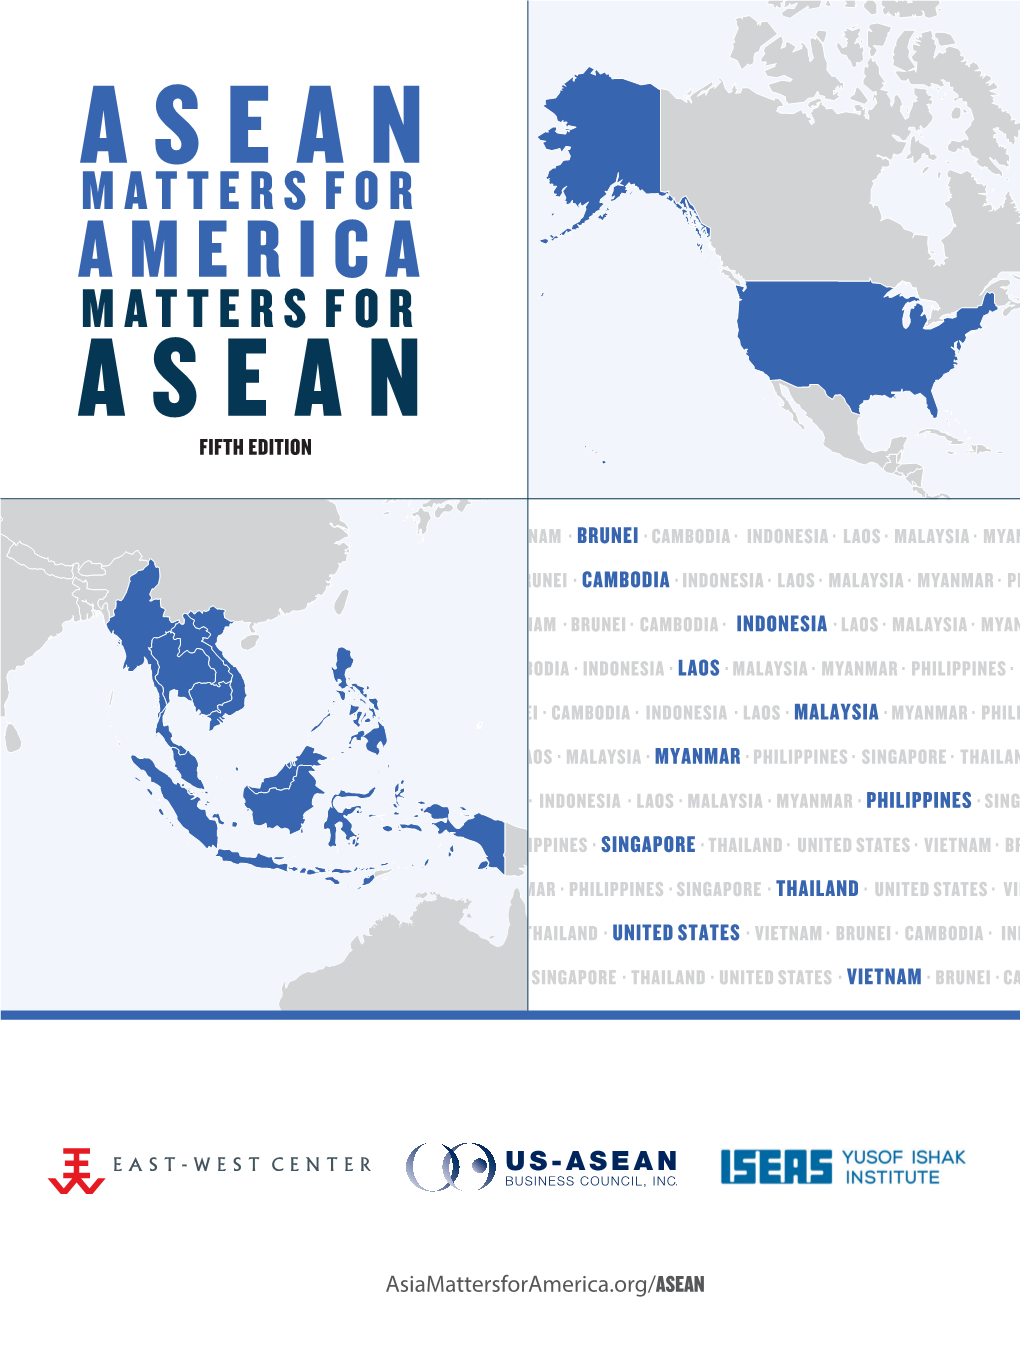 Asean Matters for America Matters for Asean Fifth Edition